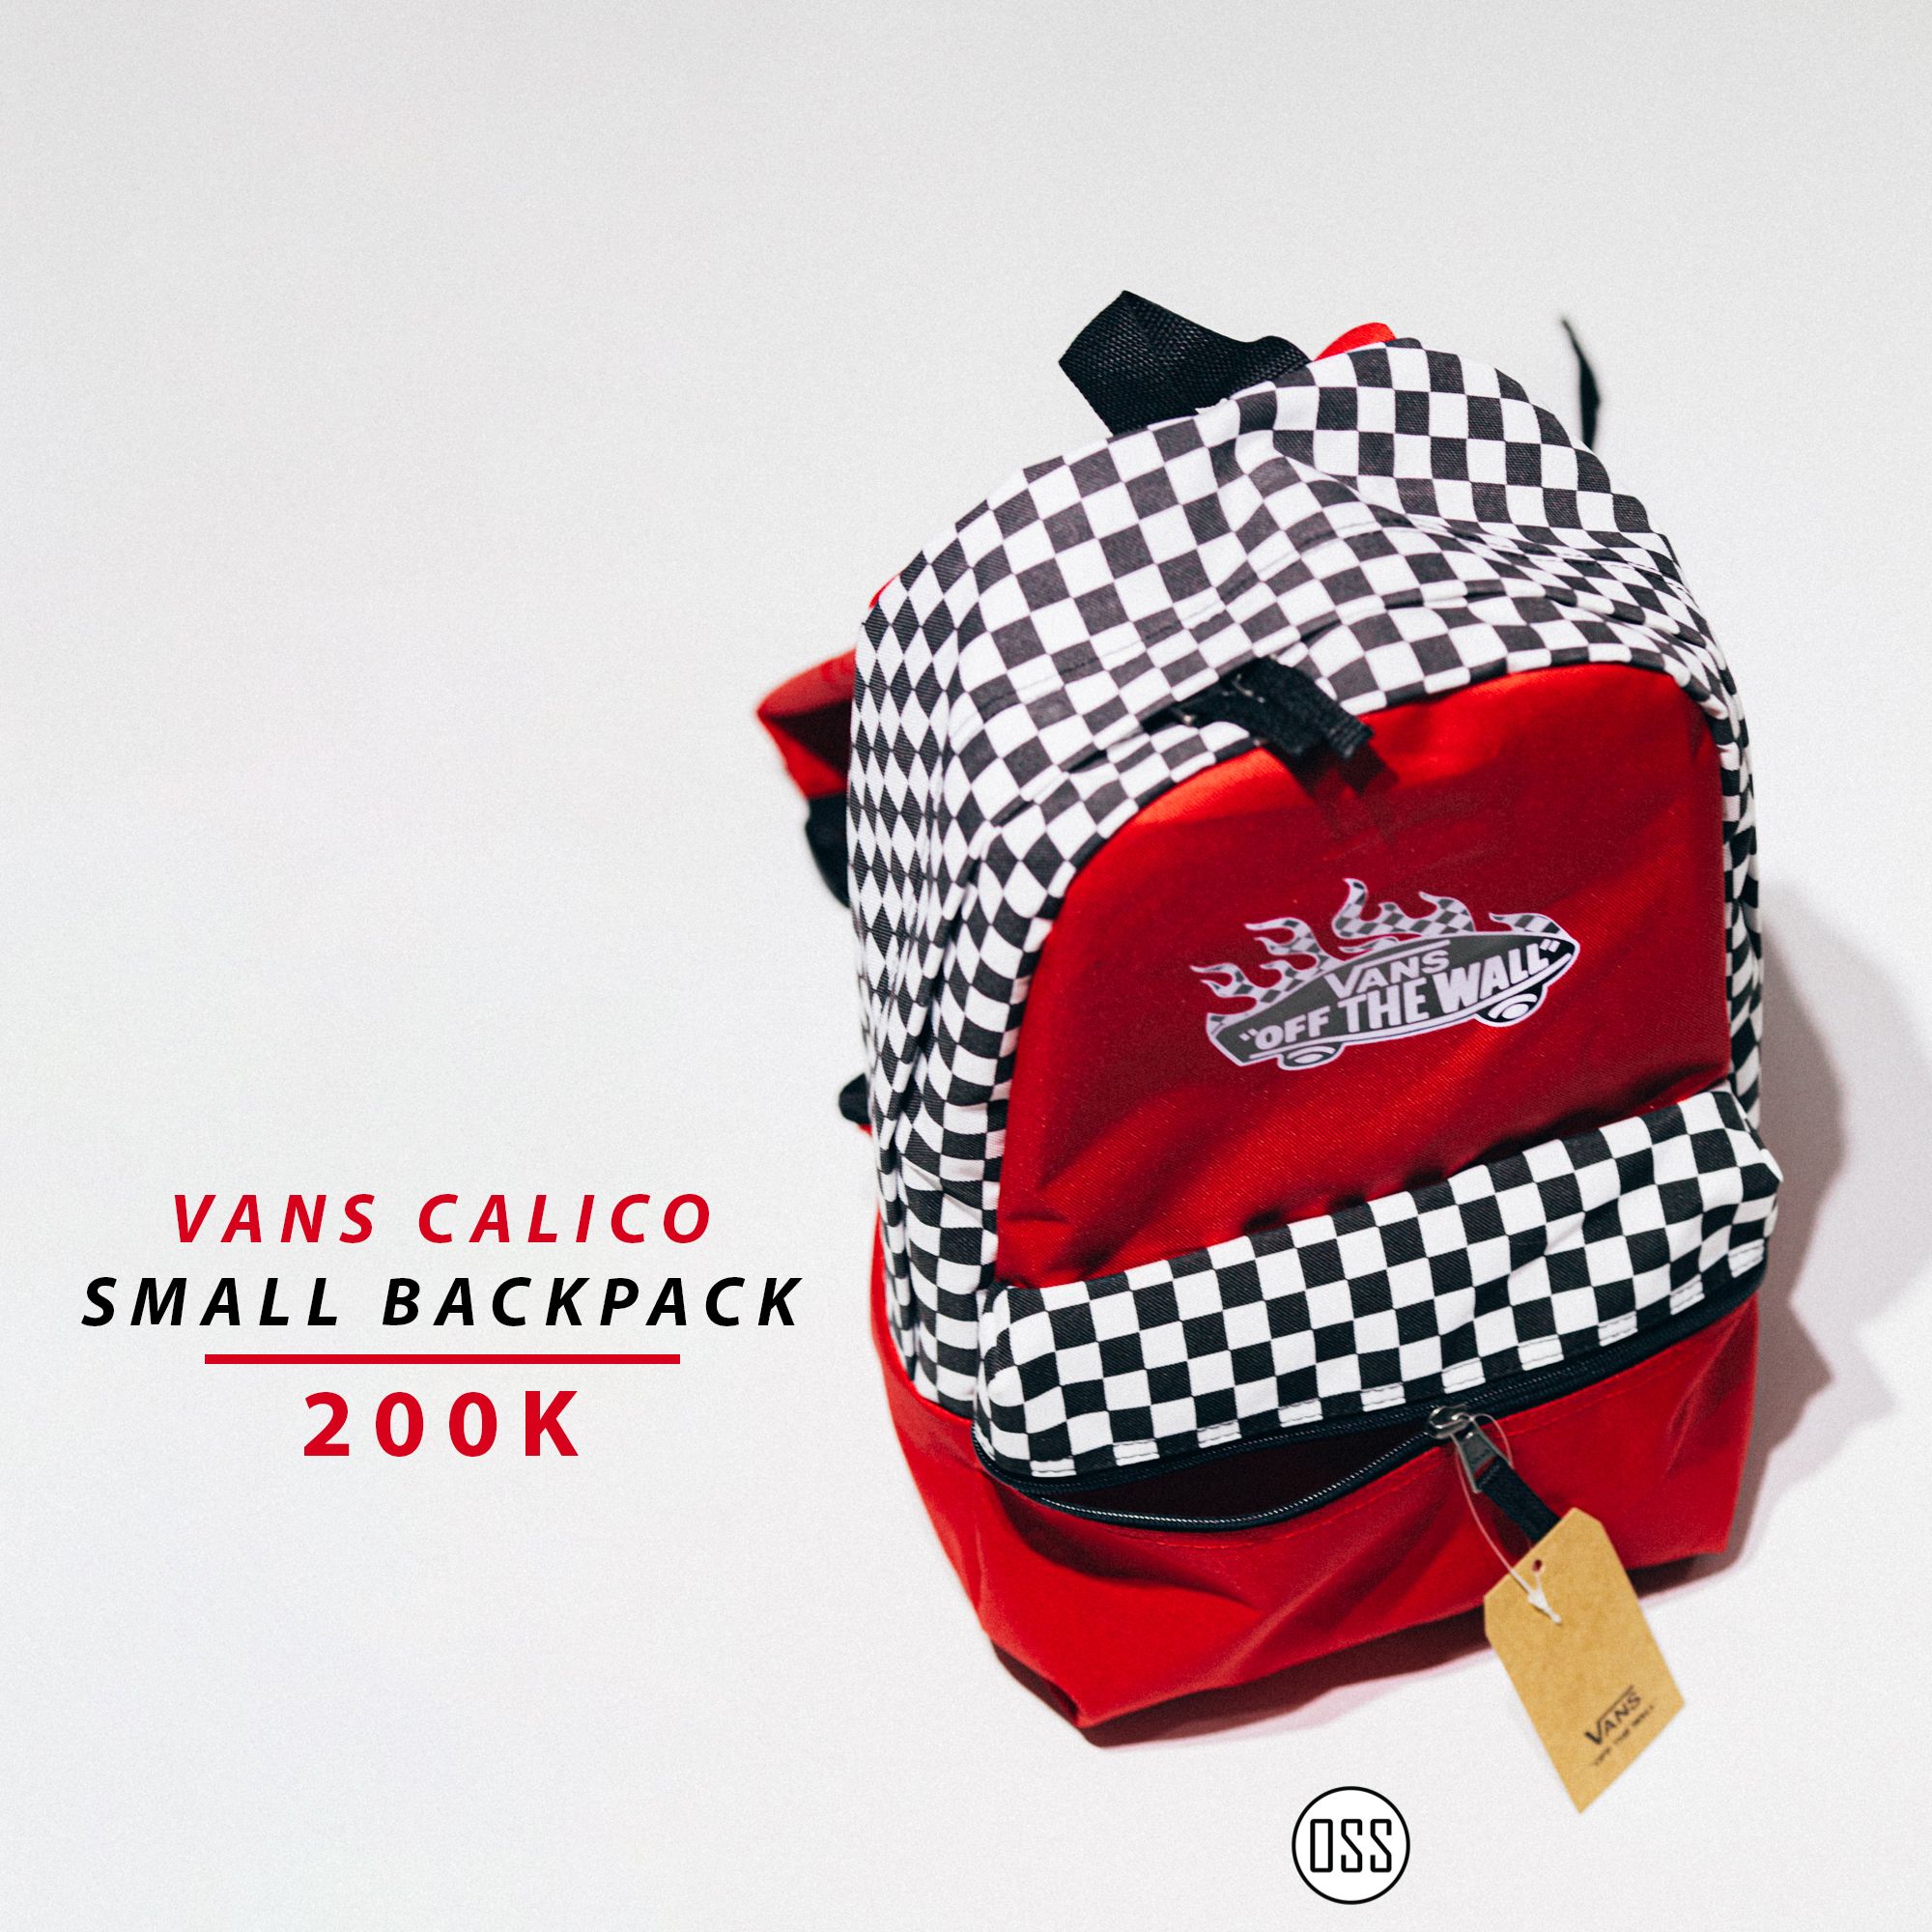  Vans Calico Small Backpack 